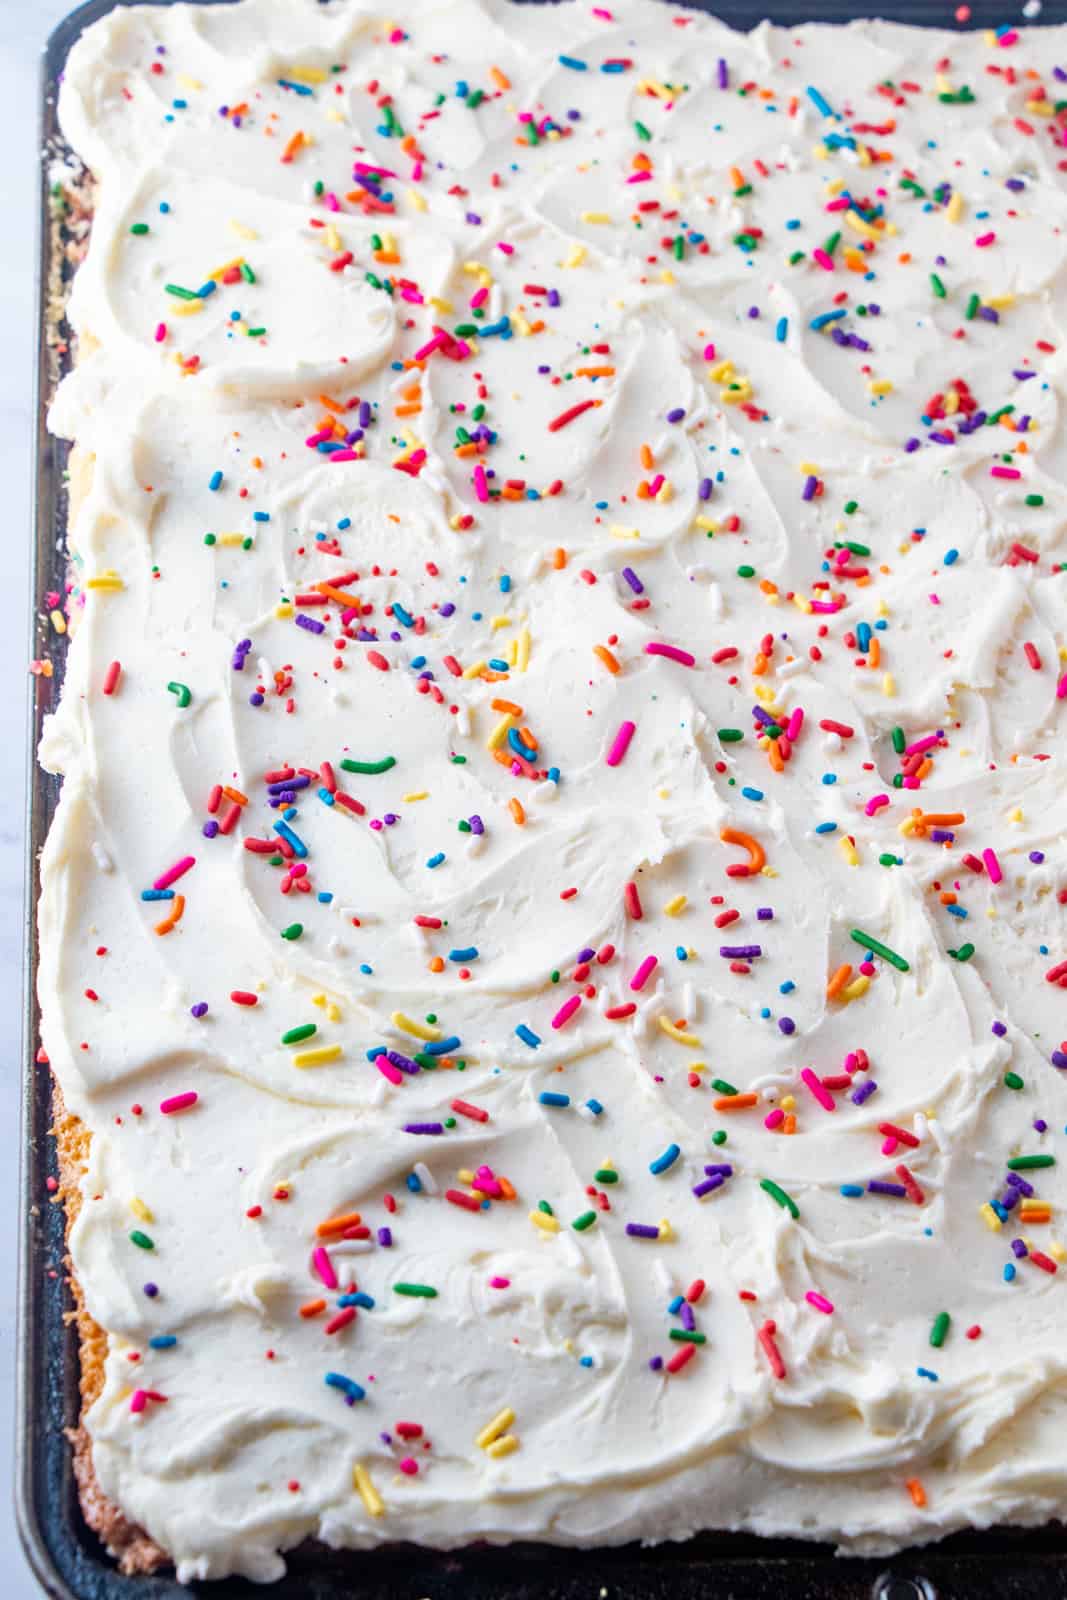 Finish frosted cake in pan topped with rainbow sprinkles 